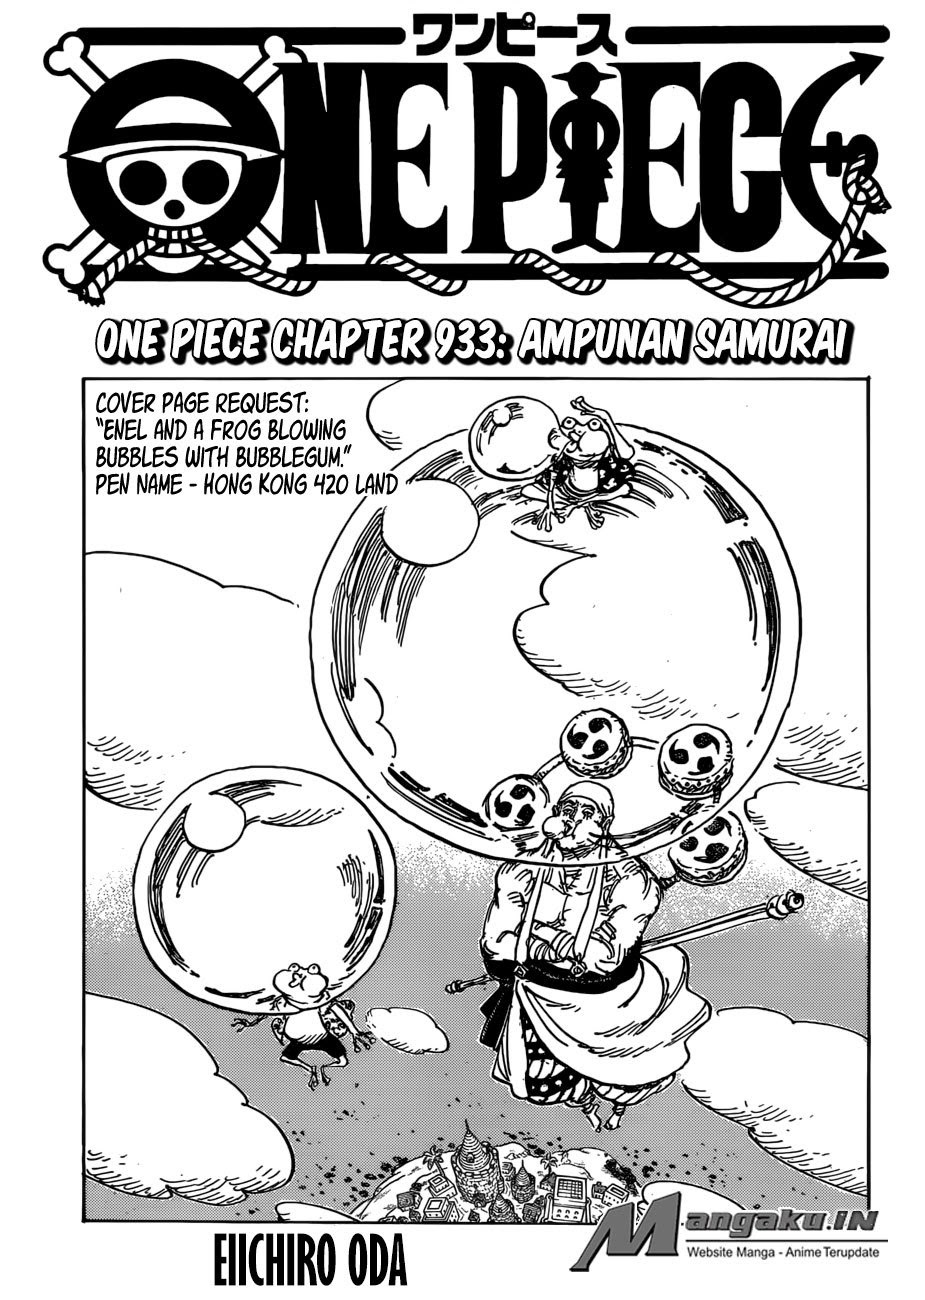 One Piece Chapter 933 Image 1